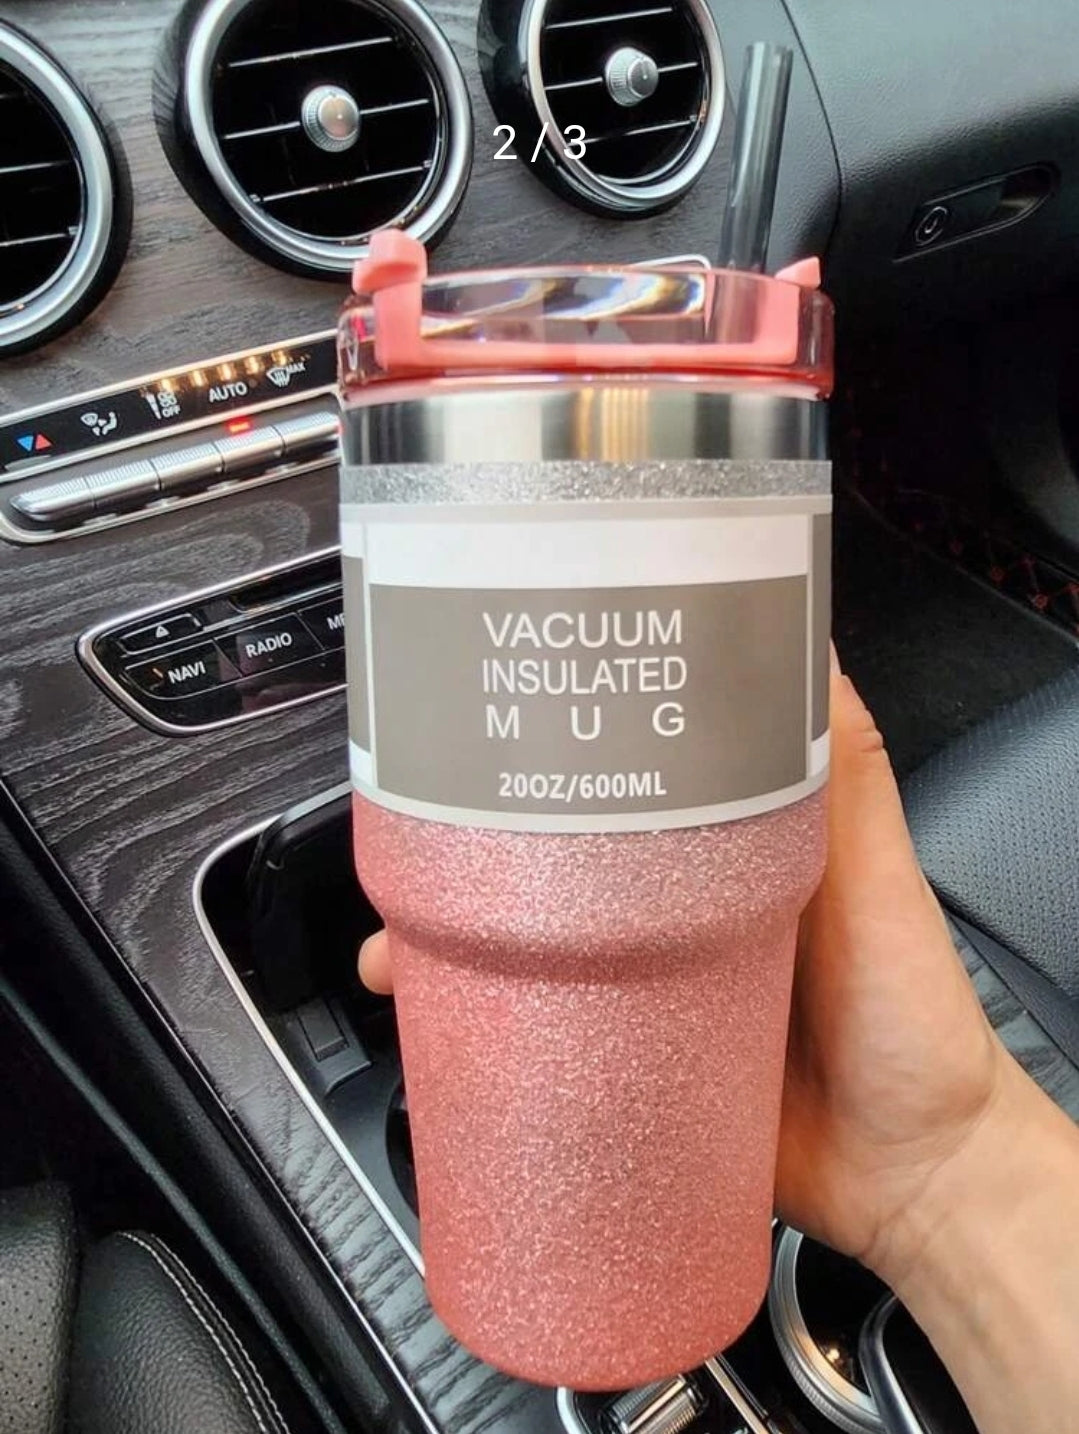 Ombre Glitter Tumbler with Straw